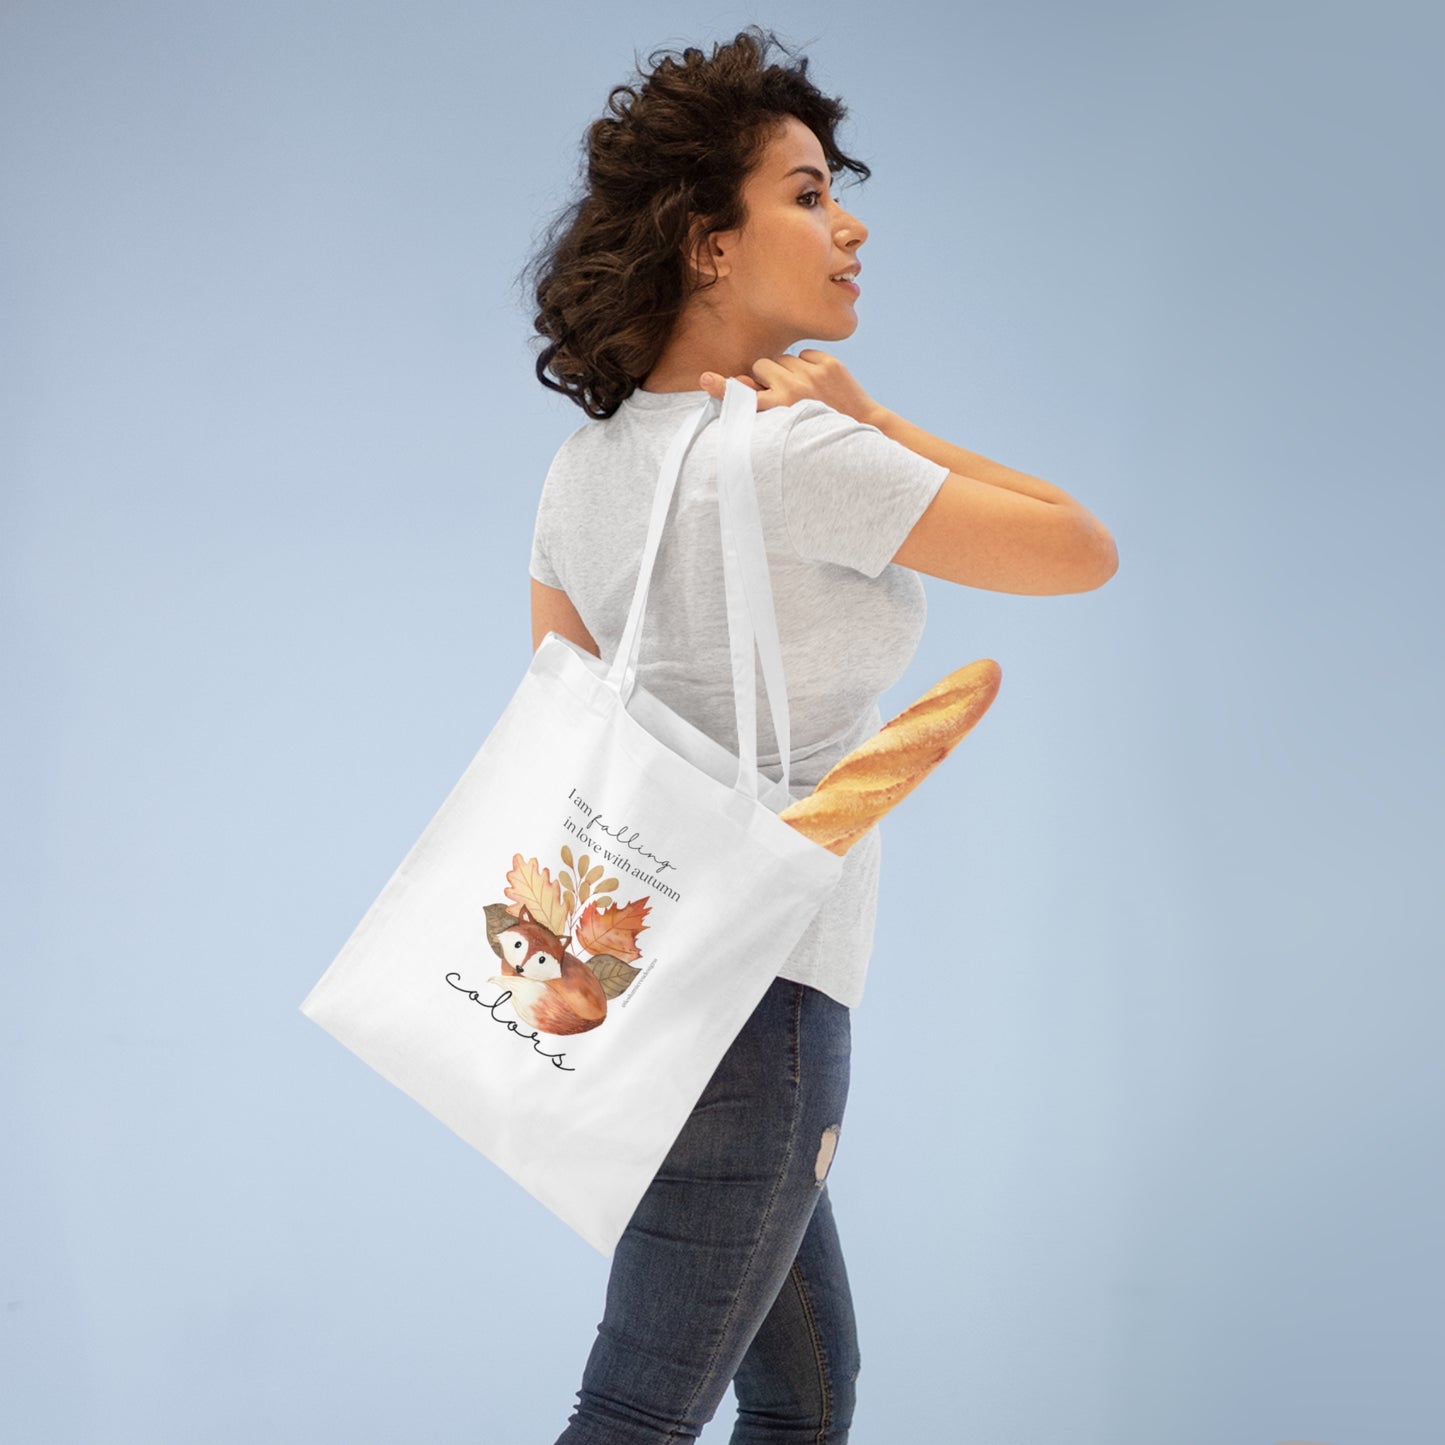 Colors of Autumn Tote bag: Ethical, Eco-Friendly, and Beautiful!